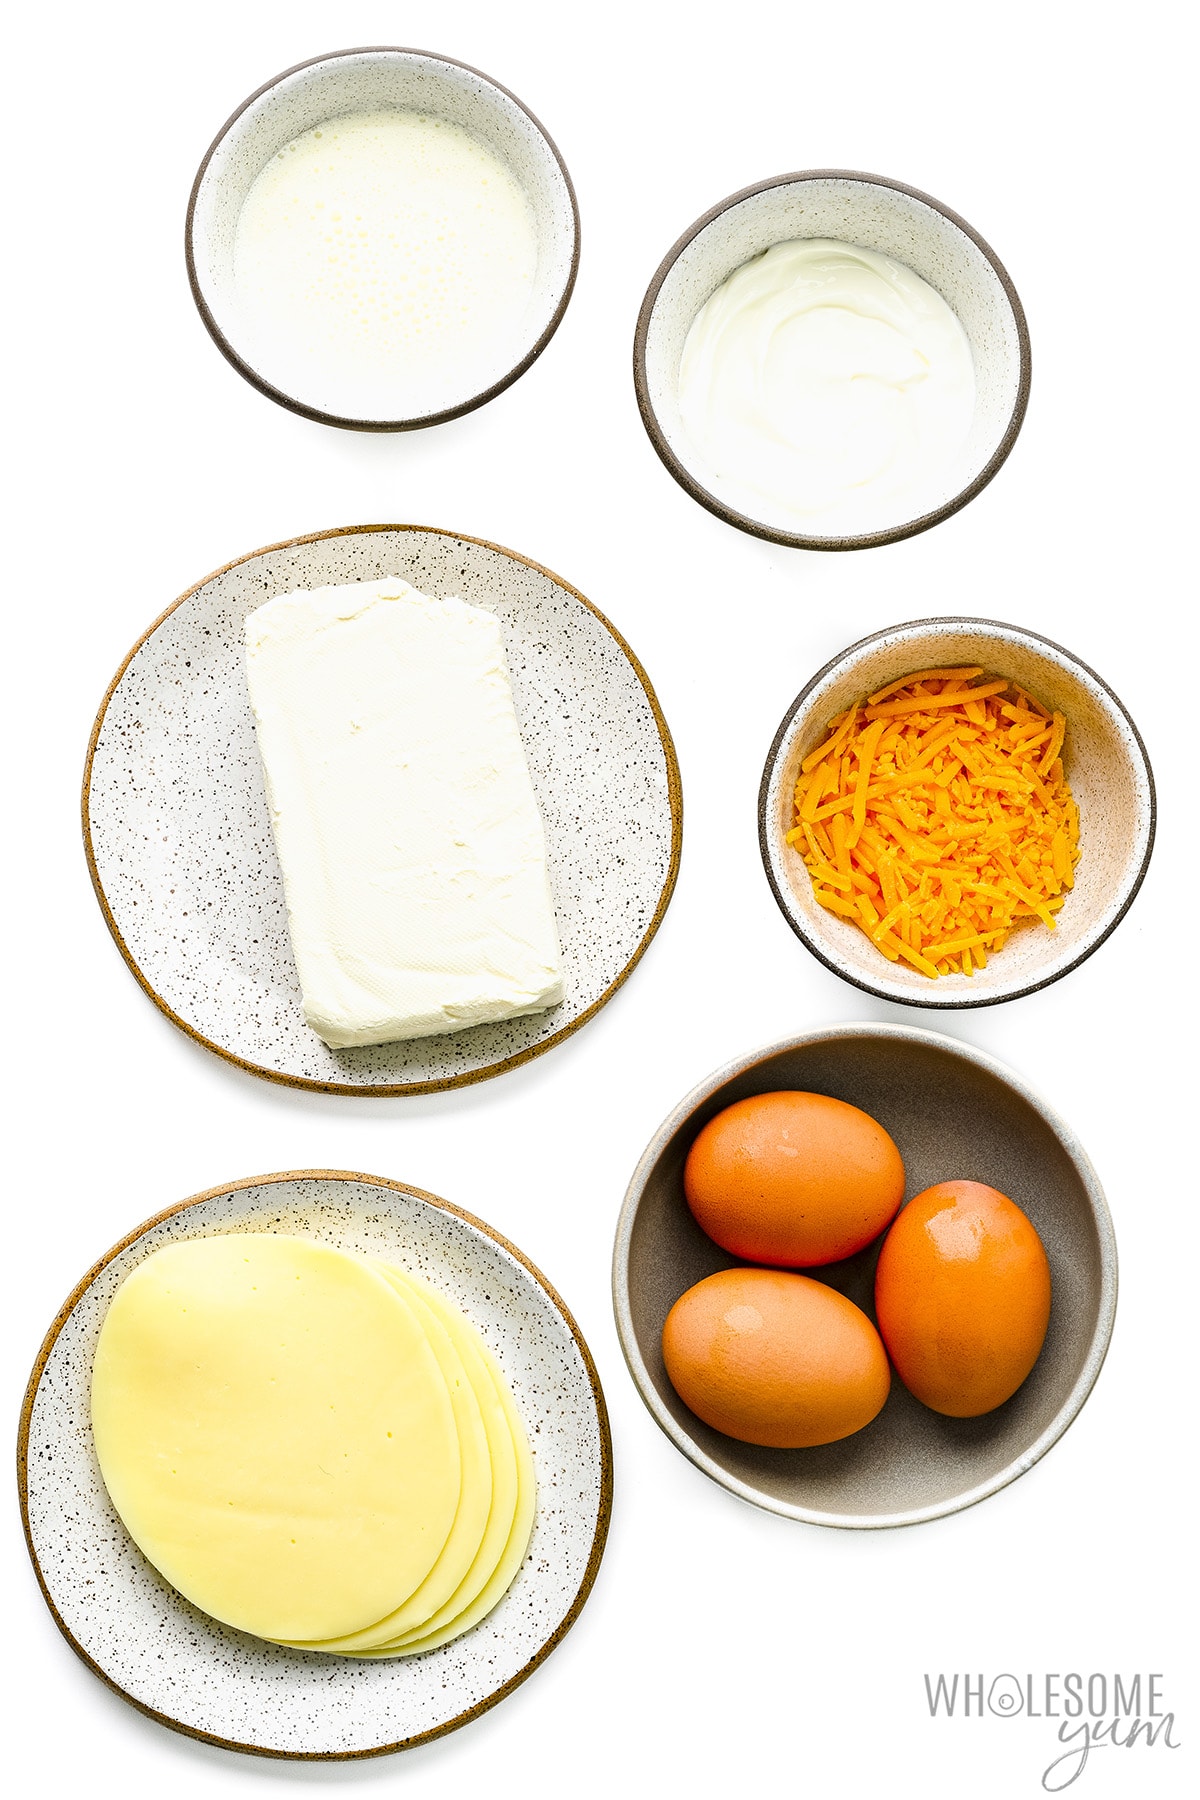 Eggs and low carb dairy on white background.